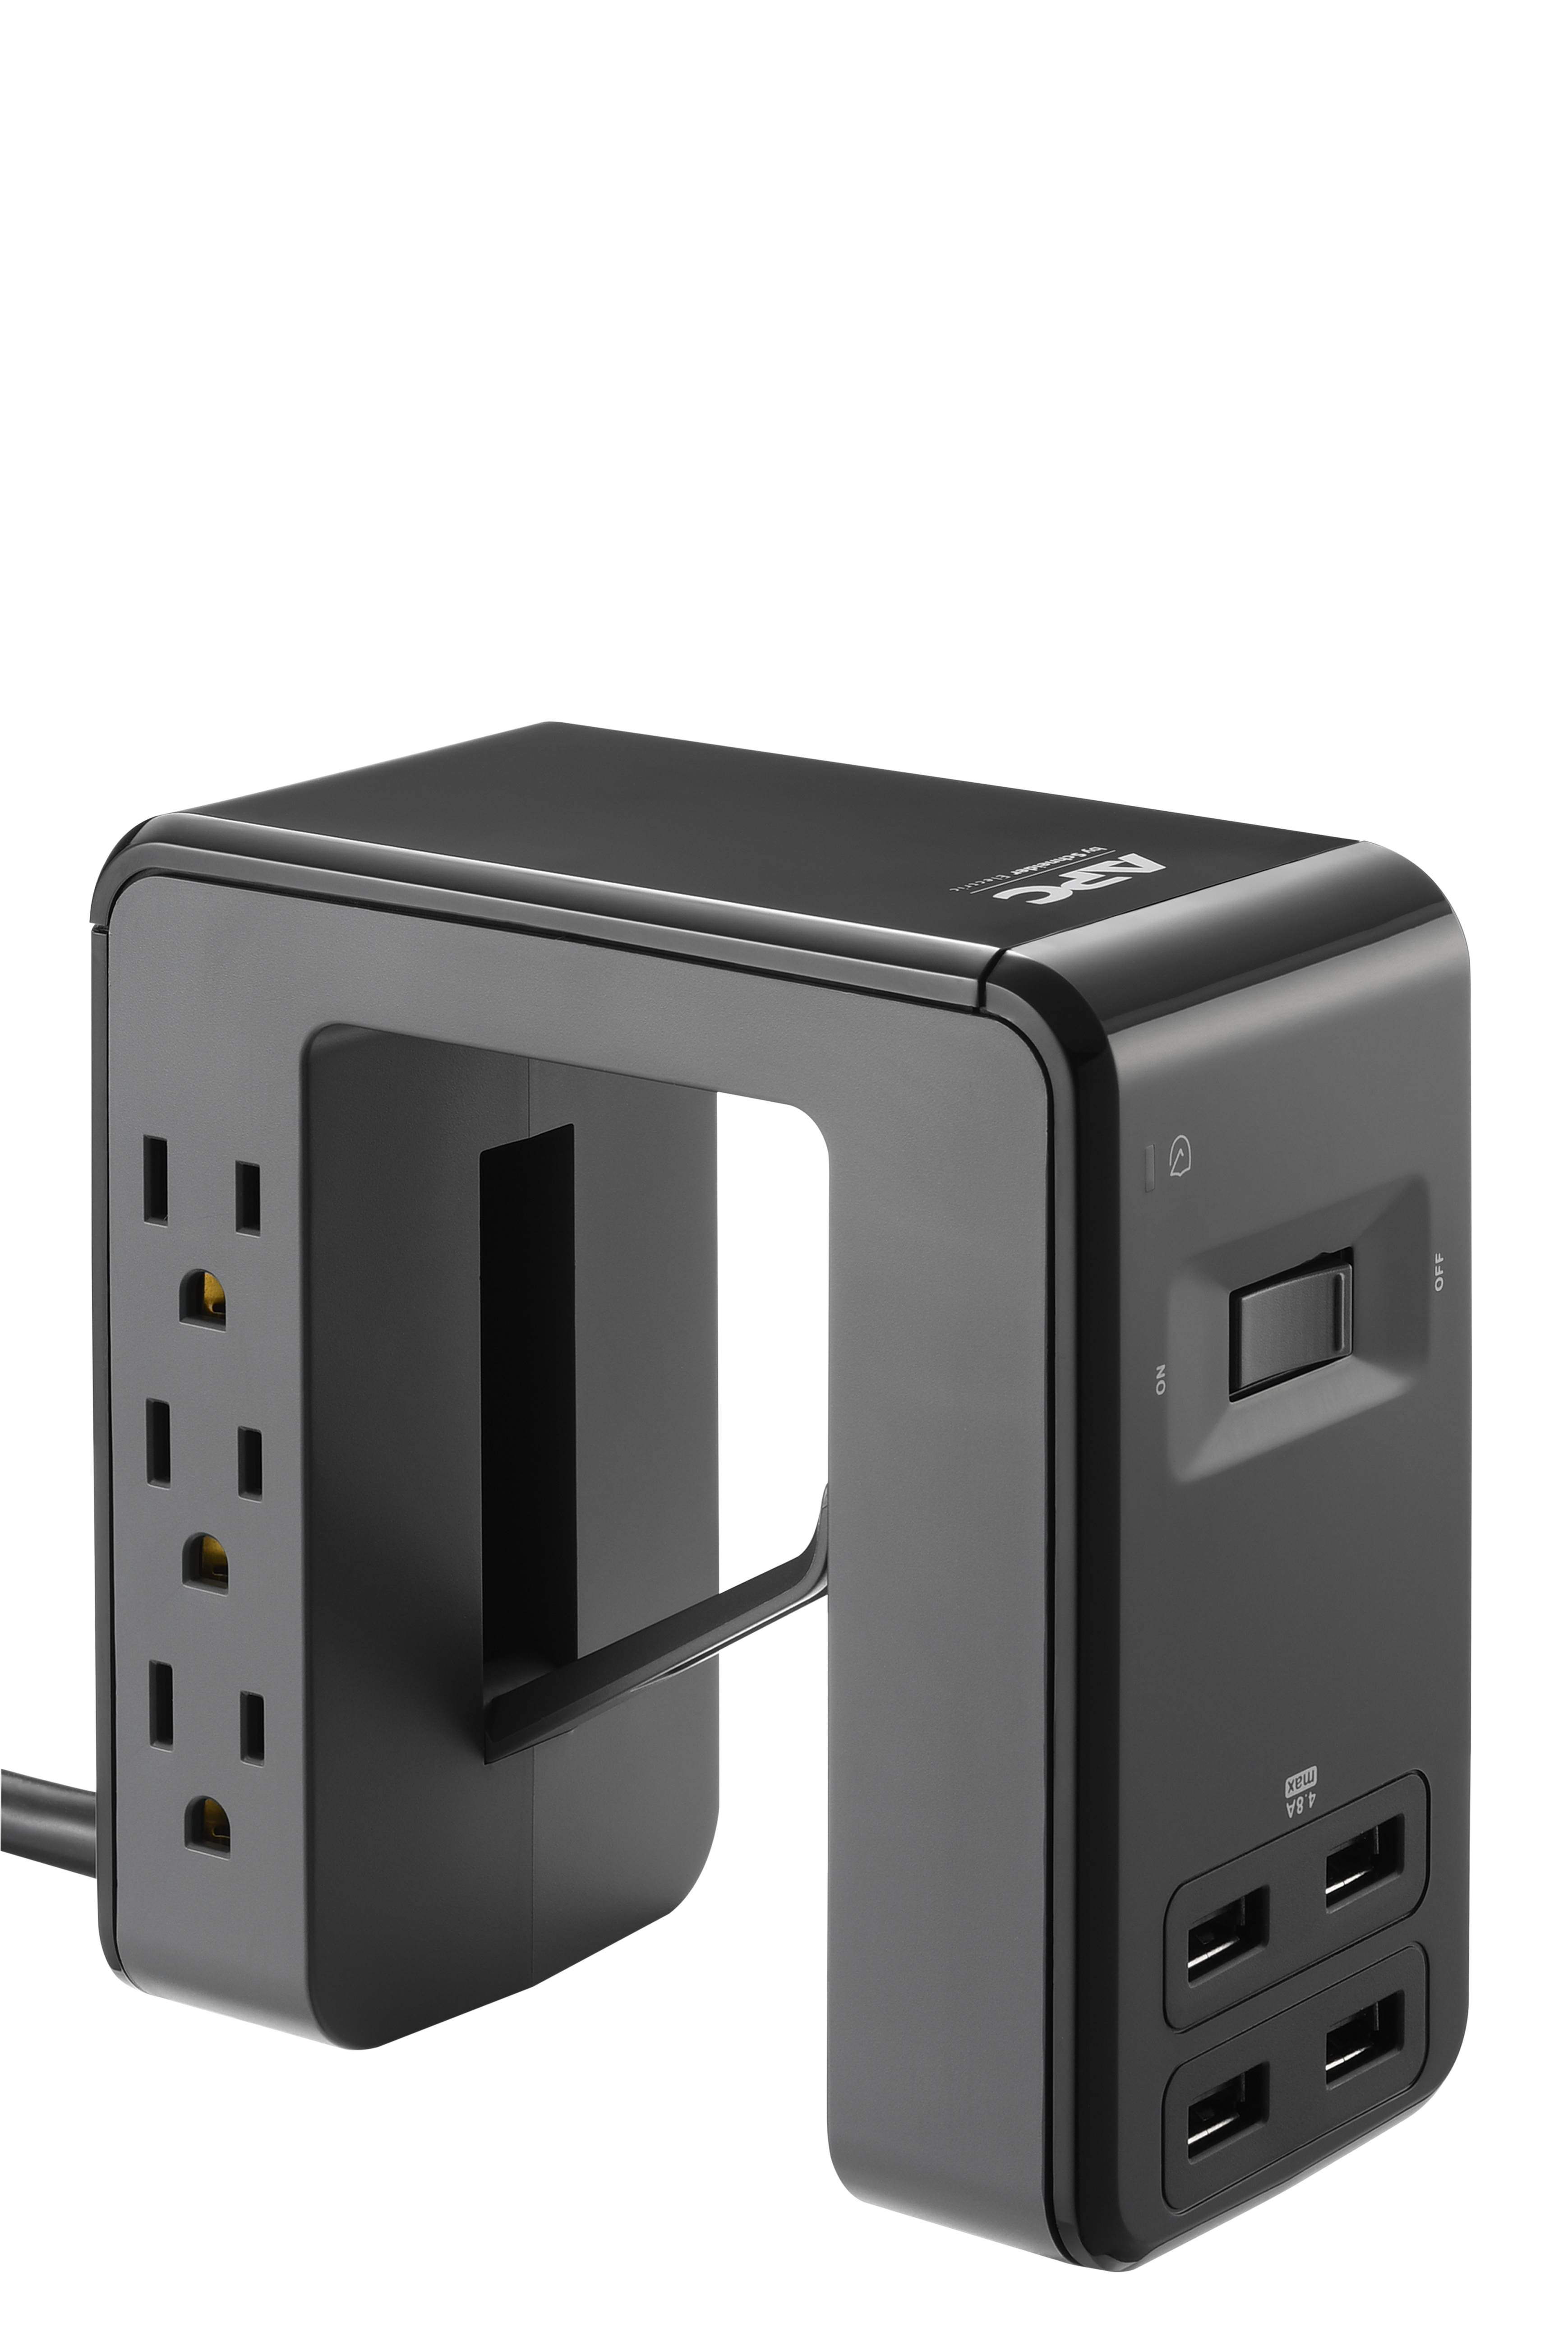 APC SURGEARREST ESSENTIAL MULTI-USE 6 OUTLET WITH 4 PORT 4.8A USB CHARGER BLACK